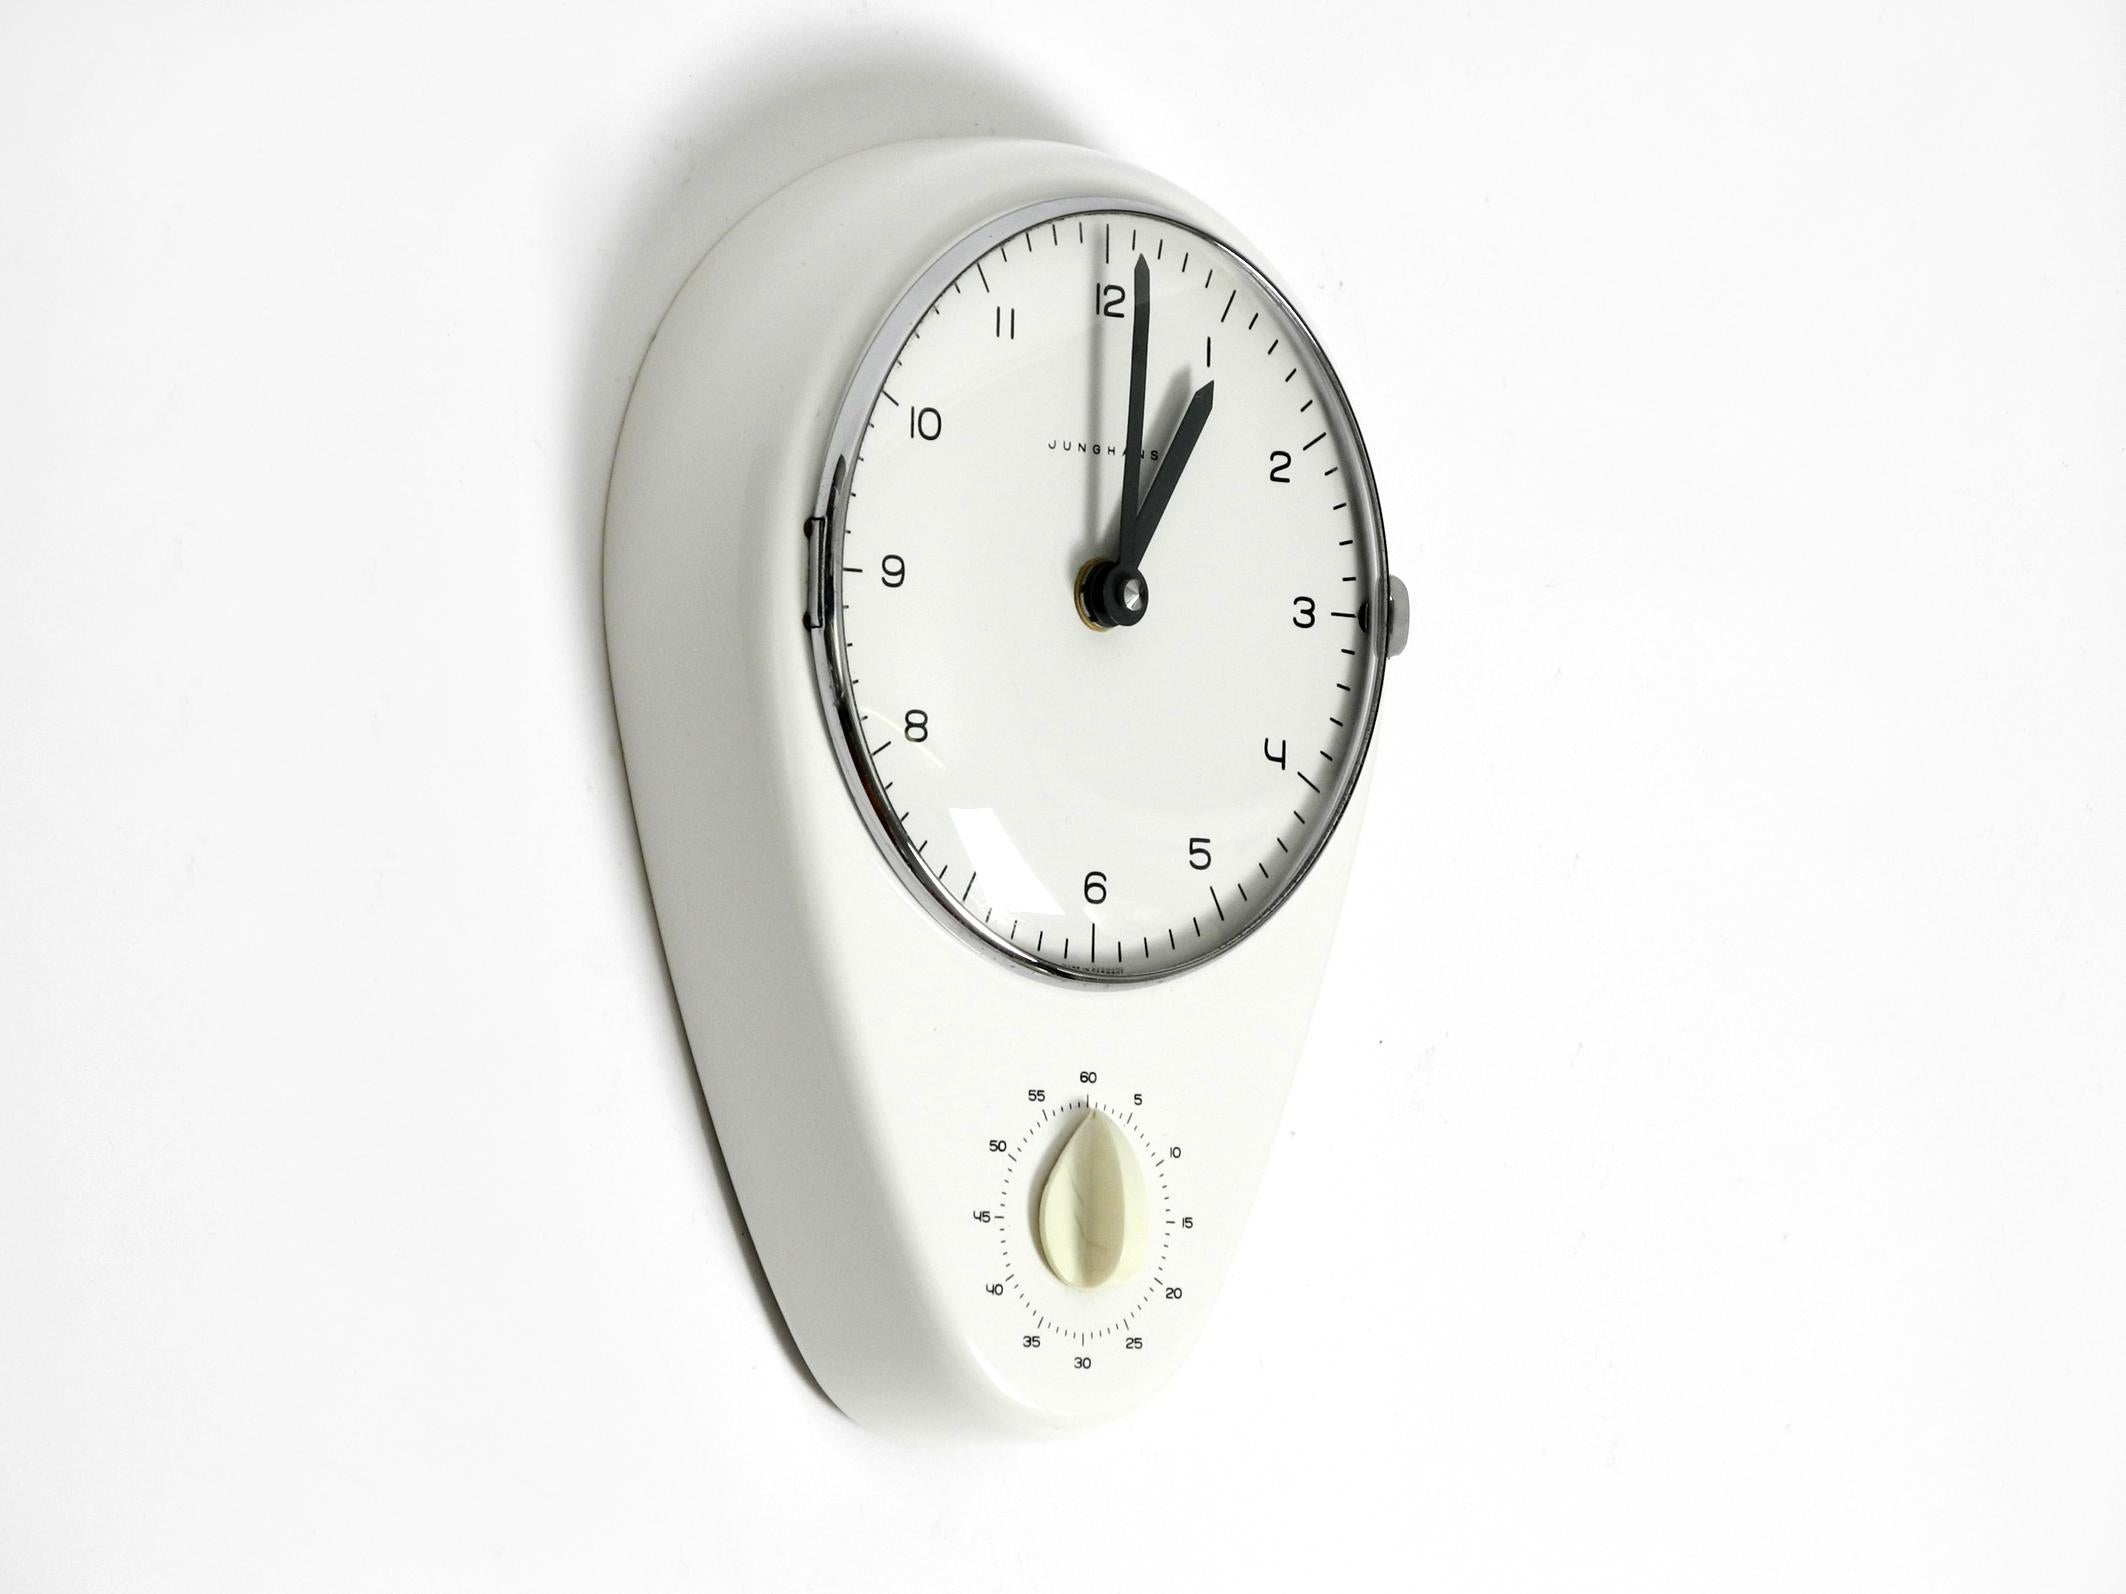 Very rare, beautiful battery-operated Mid Century wall clock by Max Bill for Junghans.
Max Bill was a very well-known Swiss architect, artist and industrial designer.
The housing is made of white glazed ceramic. Dial is covered by a curved real